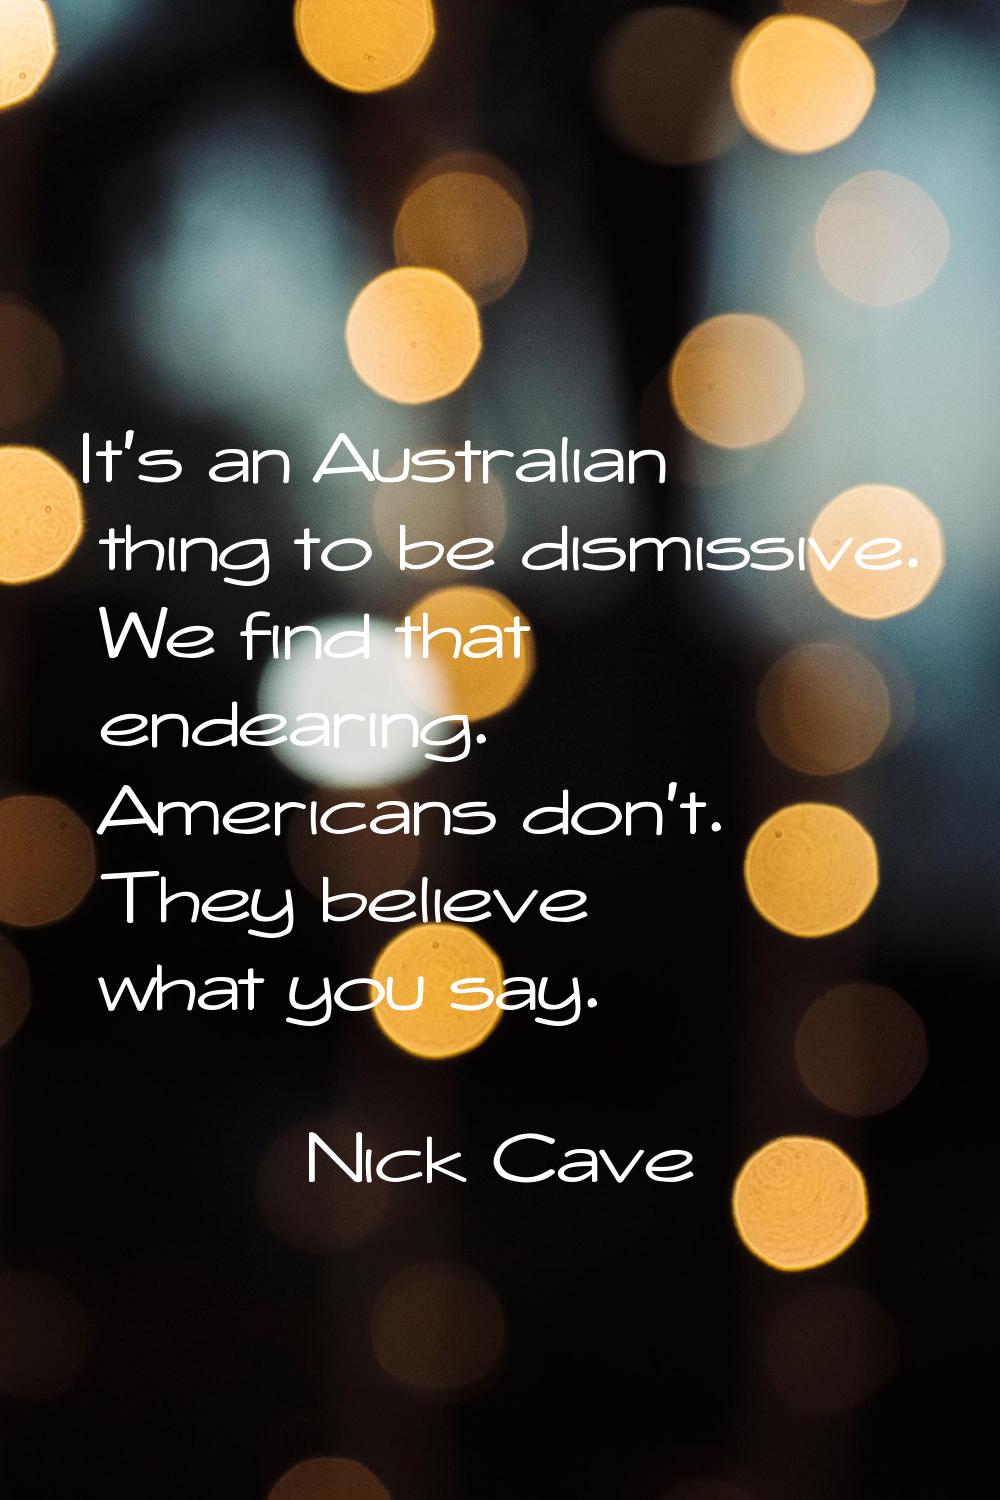 It's an Australian thing to be dismissive. We find that endearing. Americans don't. They believe wh